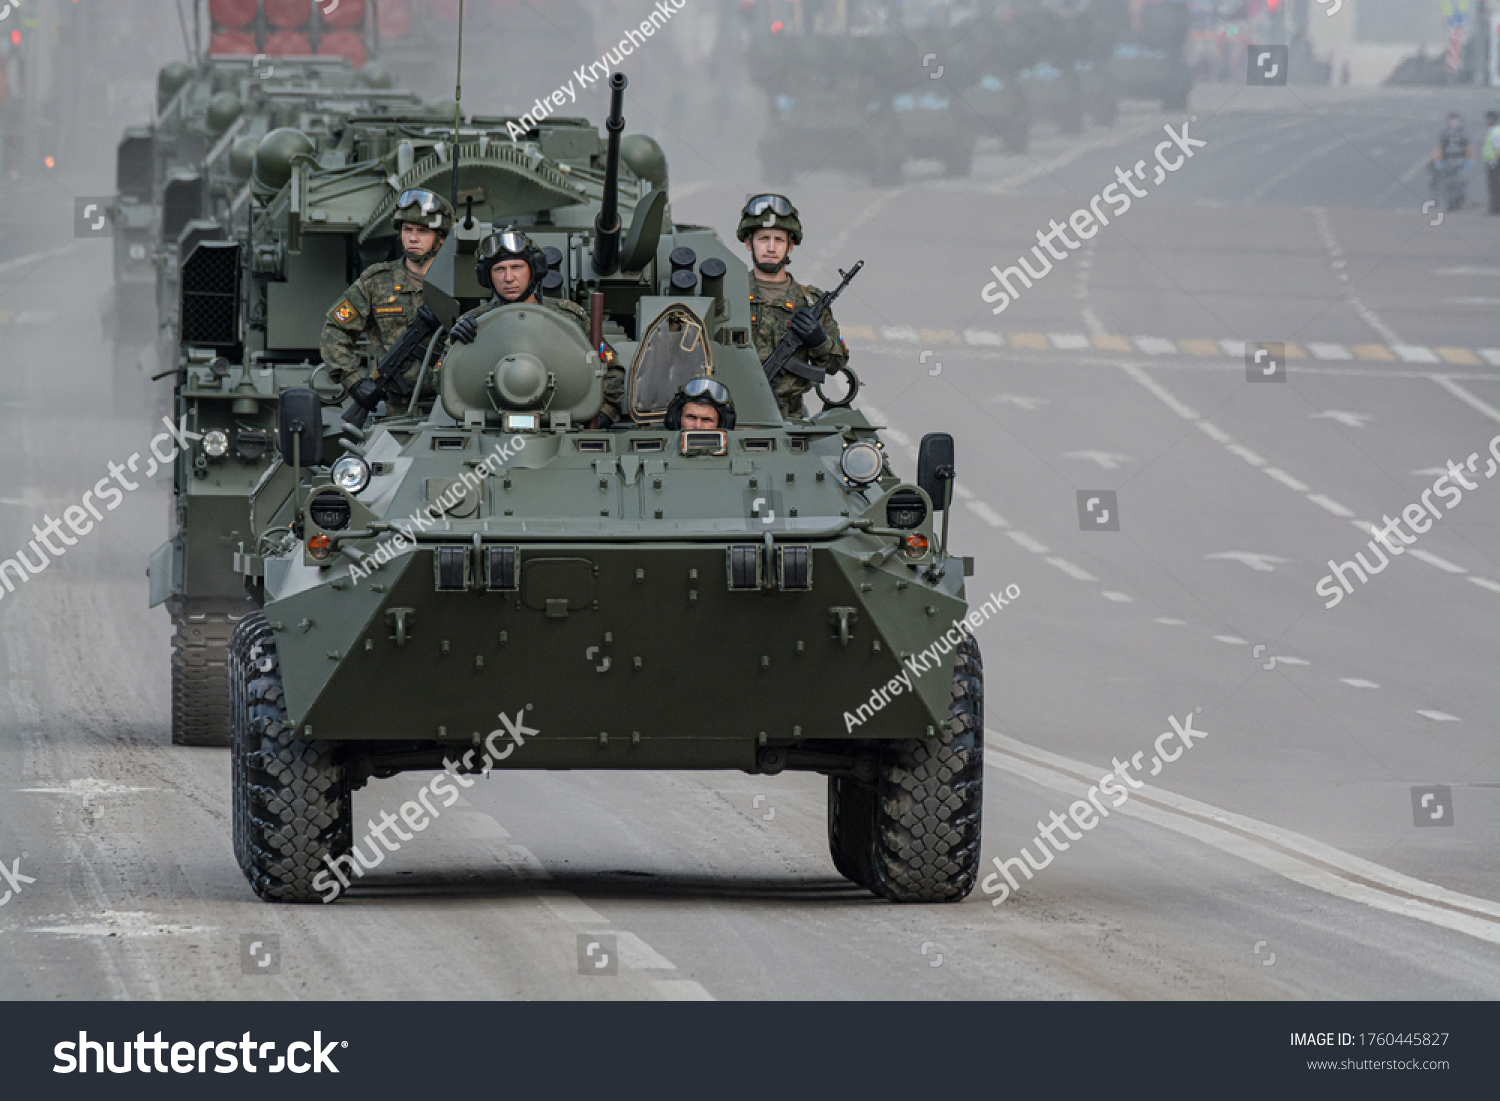 https://image.shutterstock.com/z/stock-photo-june-moscow-russia-the-btr-at-armoured-personnel-carrier-goes-to-red-square-to-1760445827.jpg